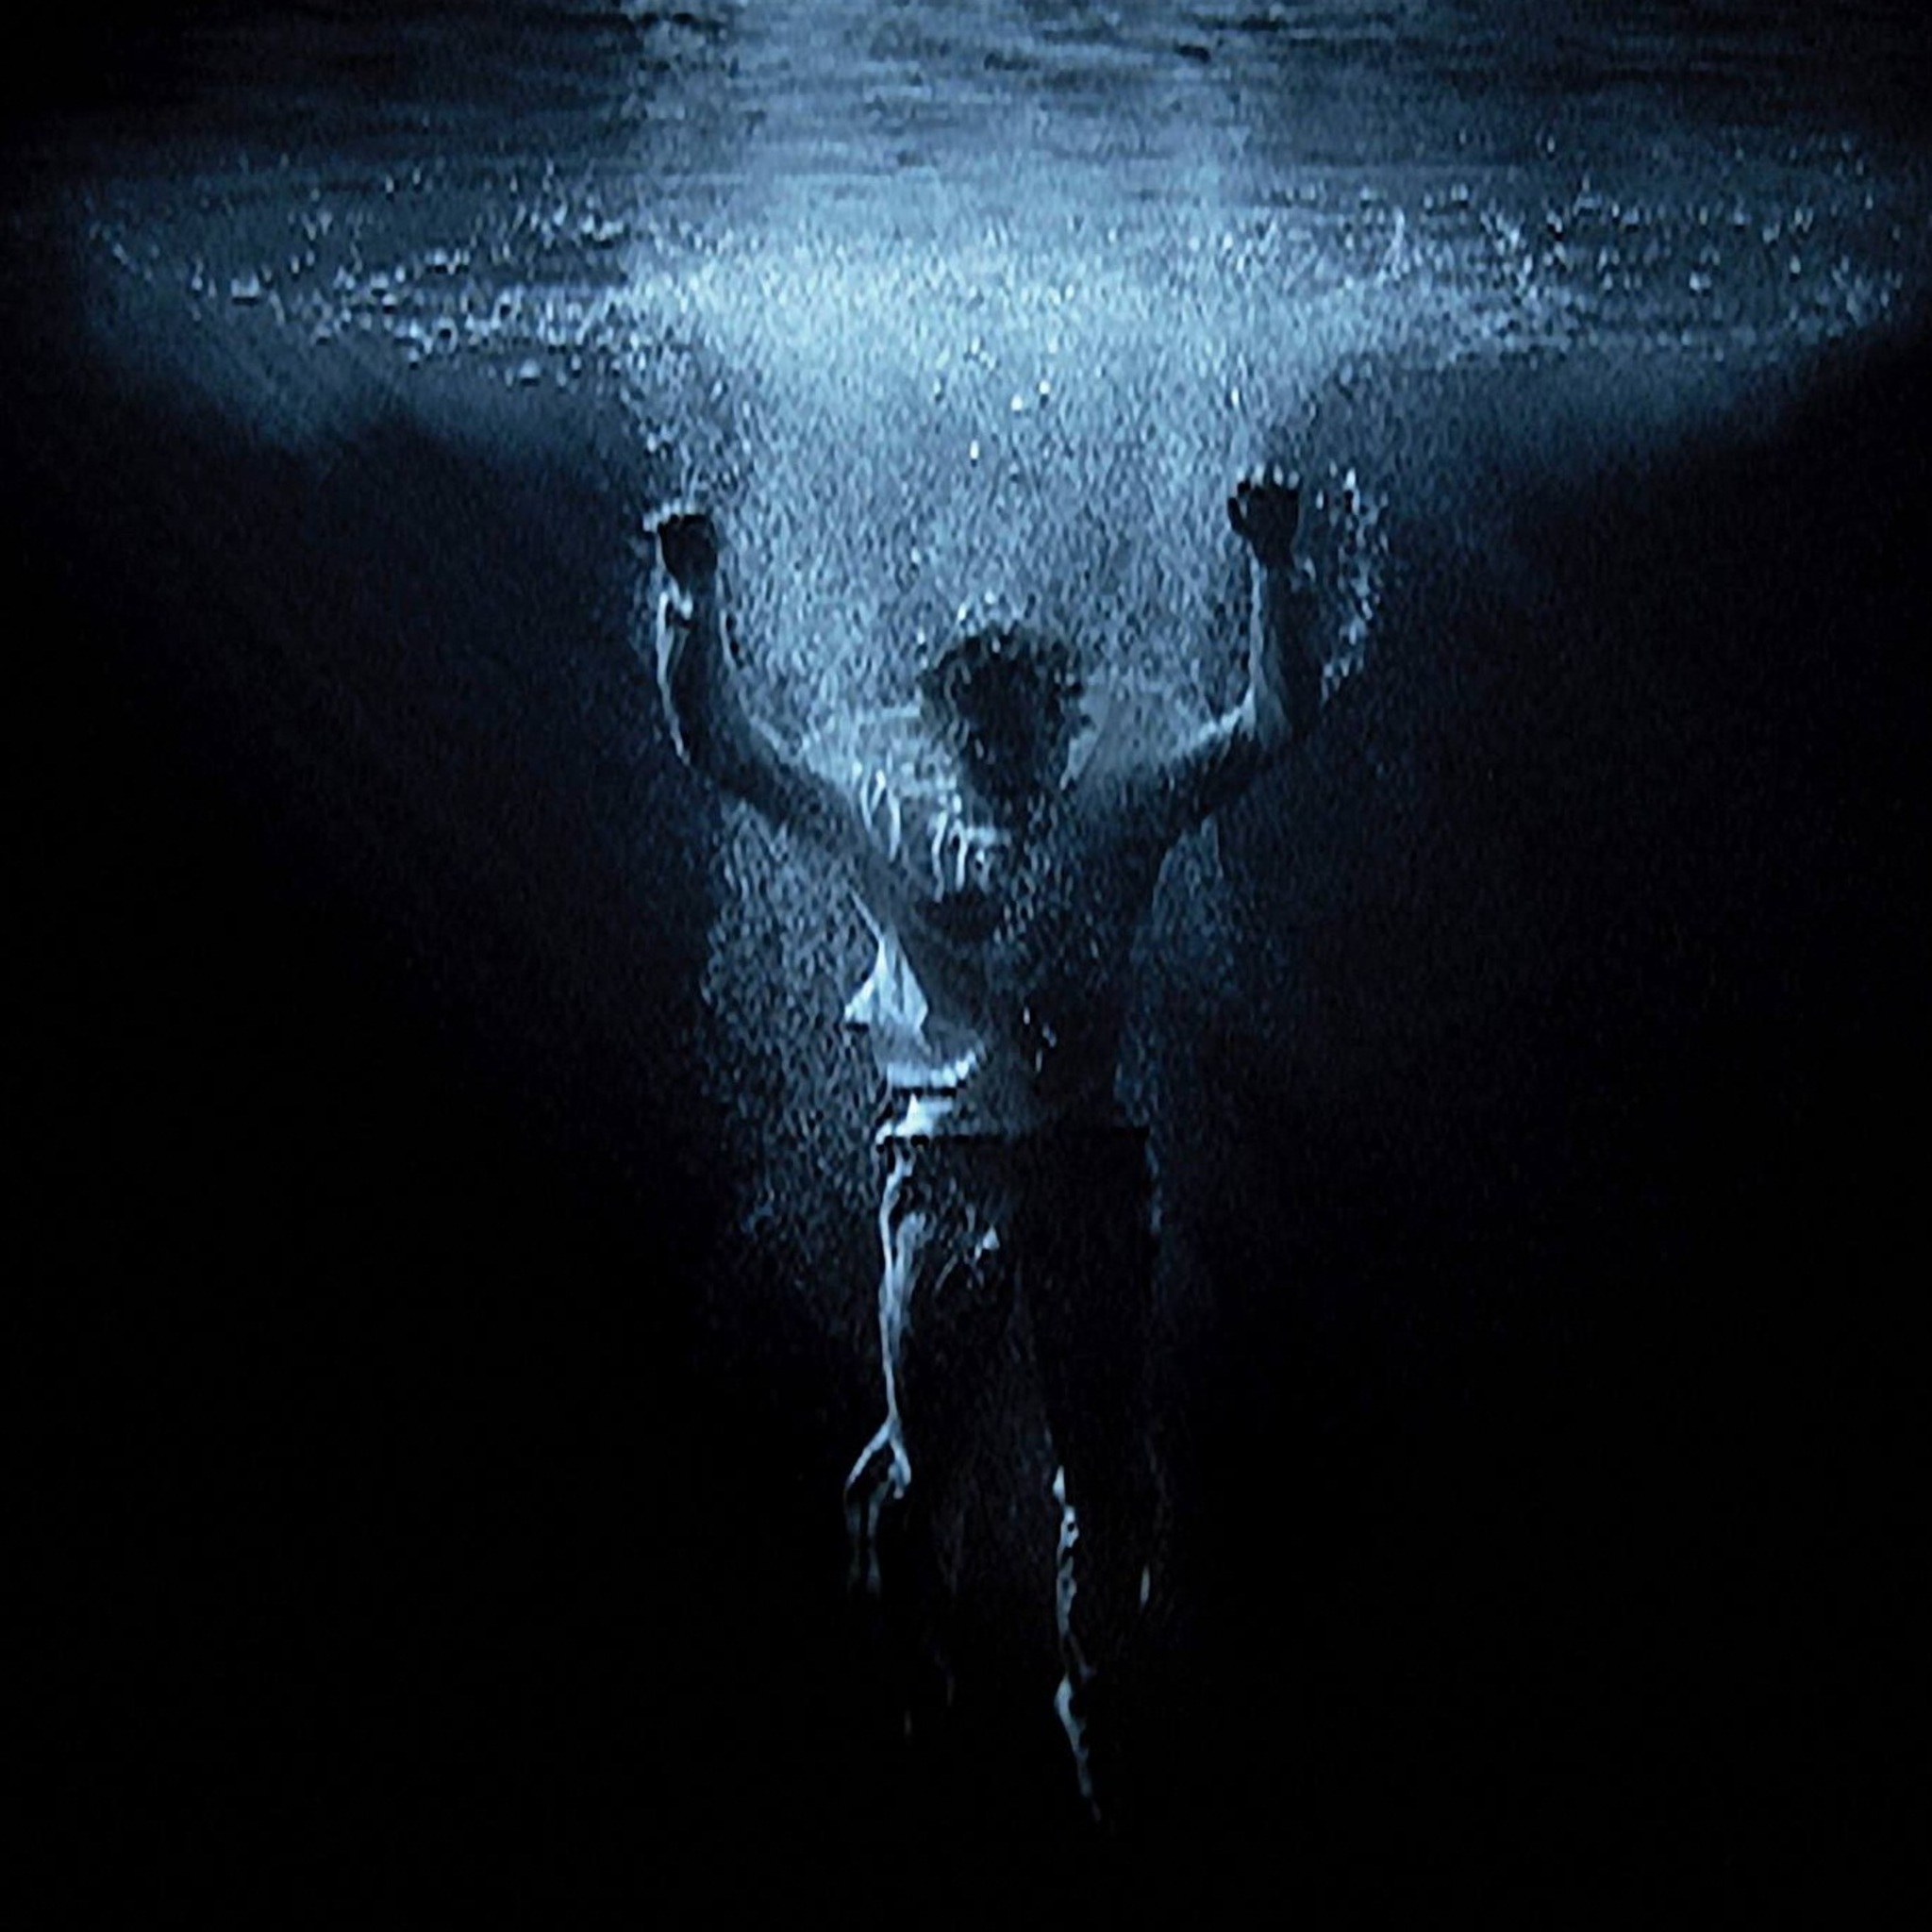 Lecture Dmitry Galkin Bill Viola: when you drown, or the visual immersion optics